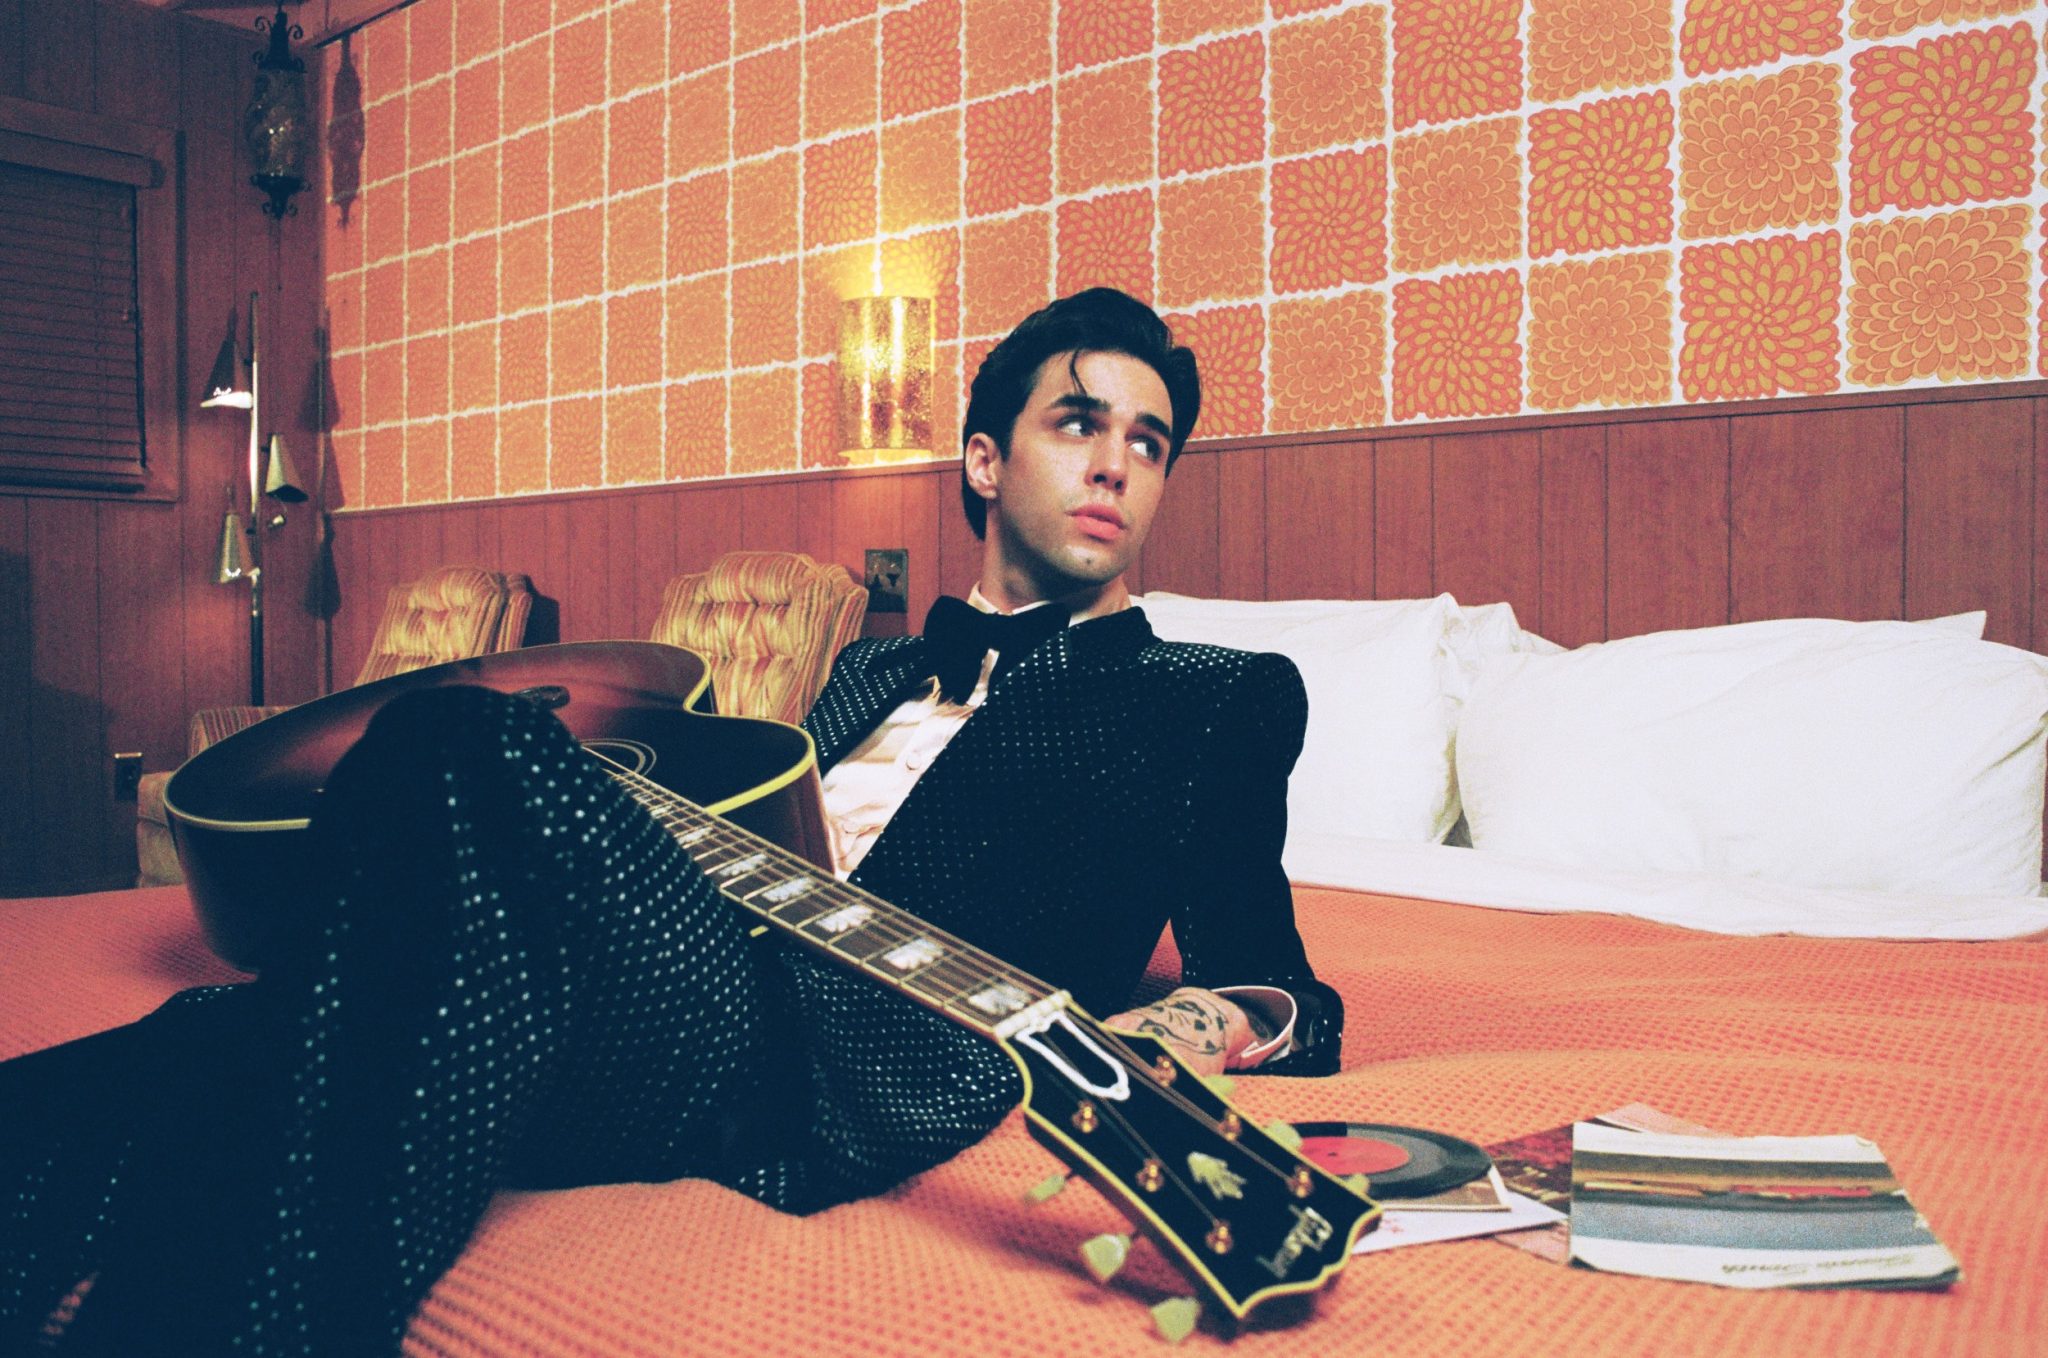 Stephen Sanchez reclining on a bed with a guitar across his lap